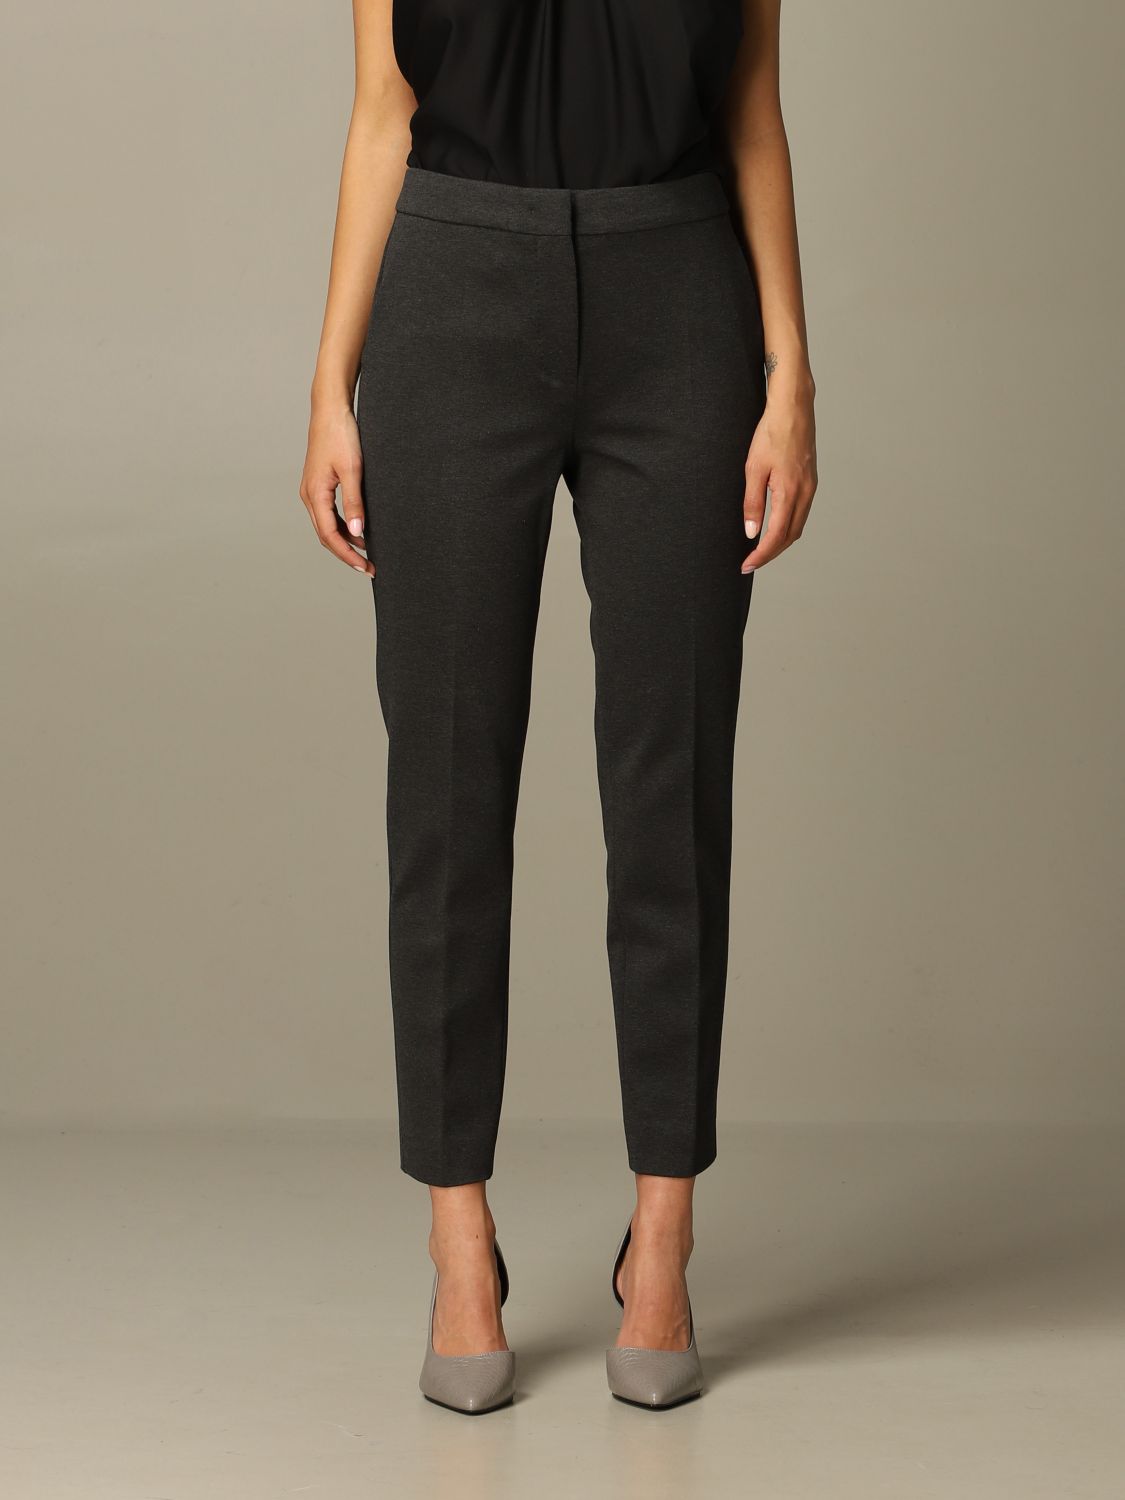 Max Mara Outlet: trousers in slim fit cotton jersey - Charcoal | Max ...